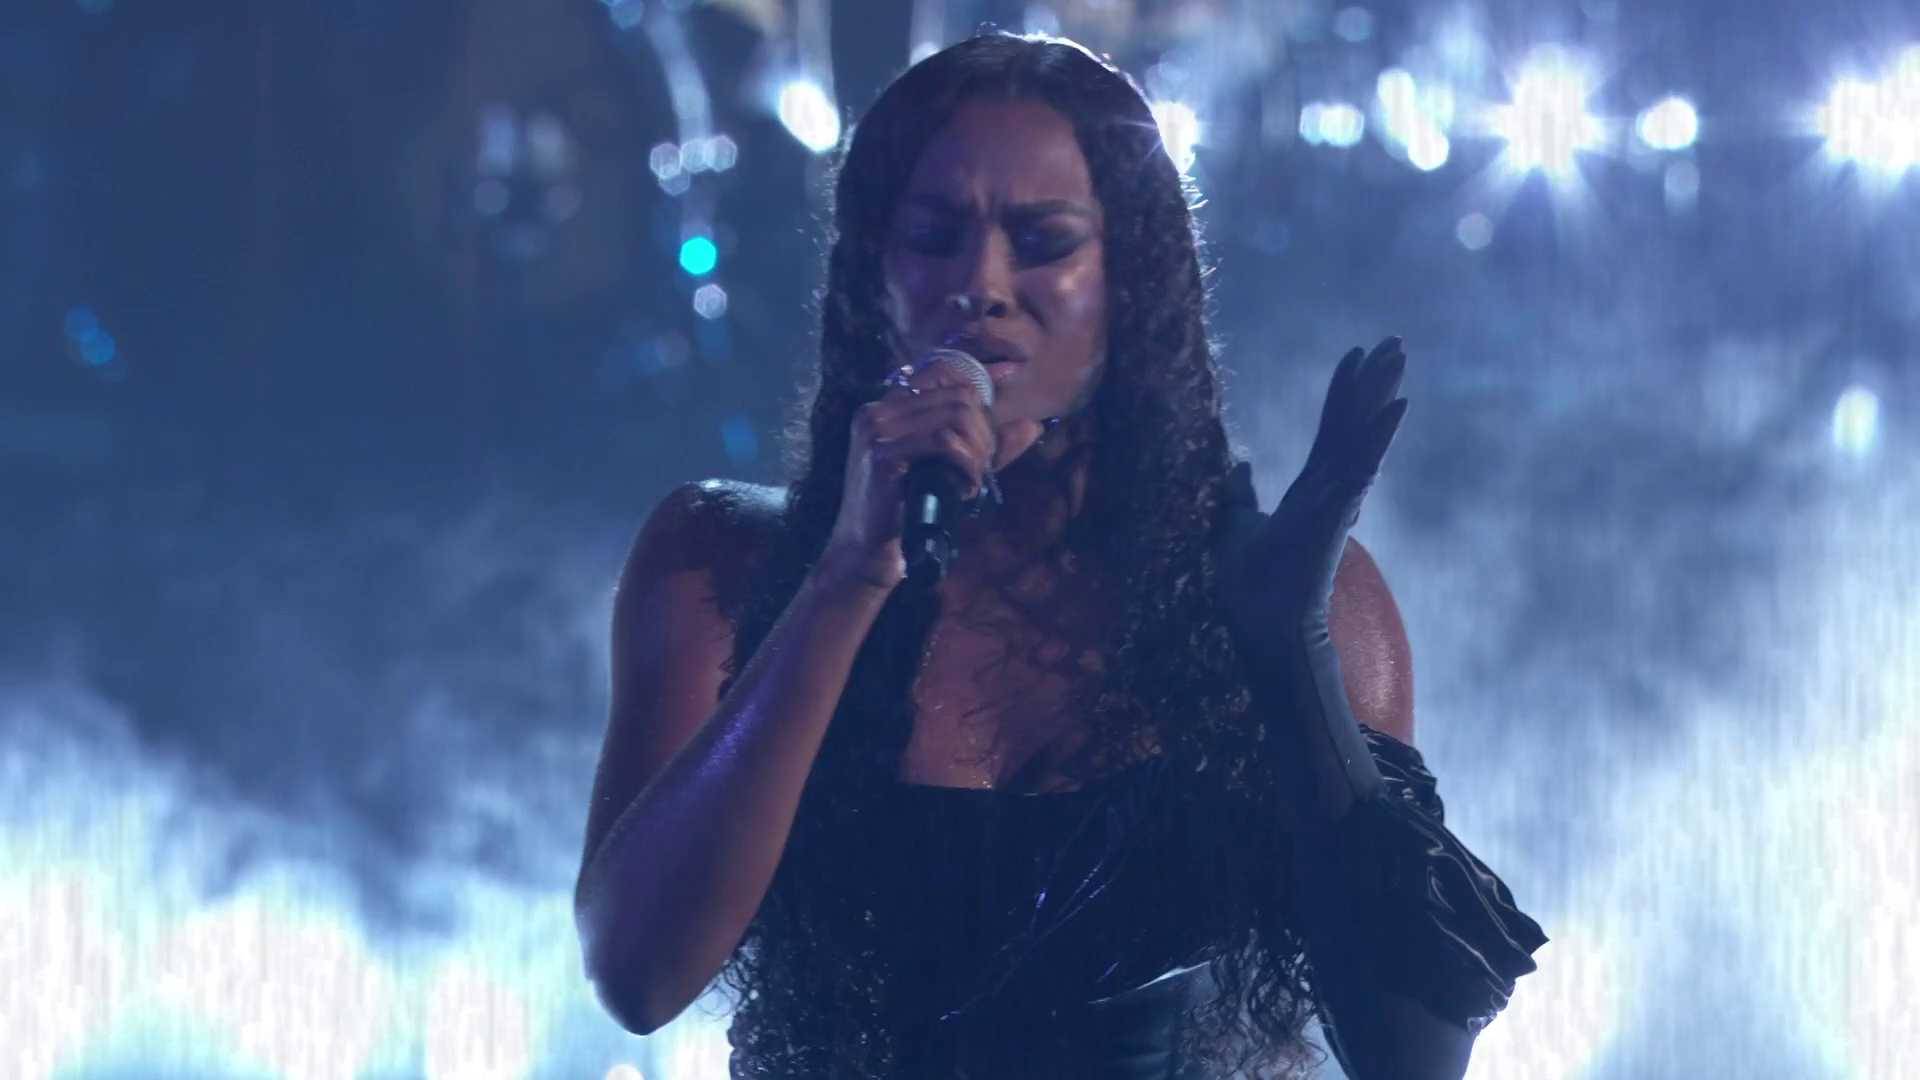 Coco Jones performs her song “ICU” at the BET Awards 2023.